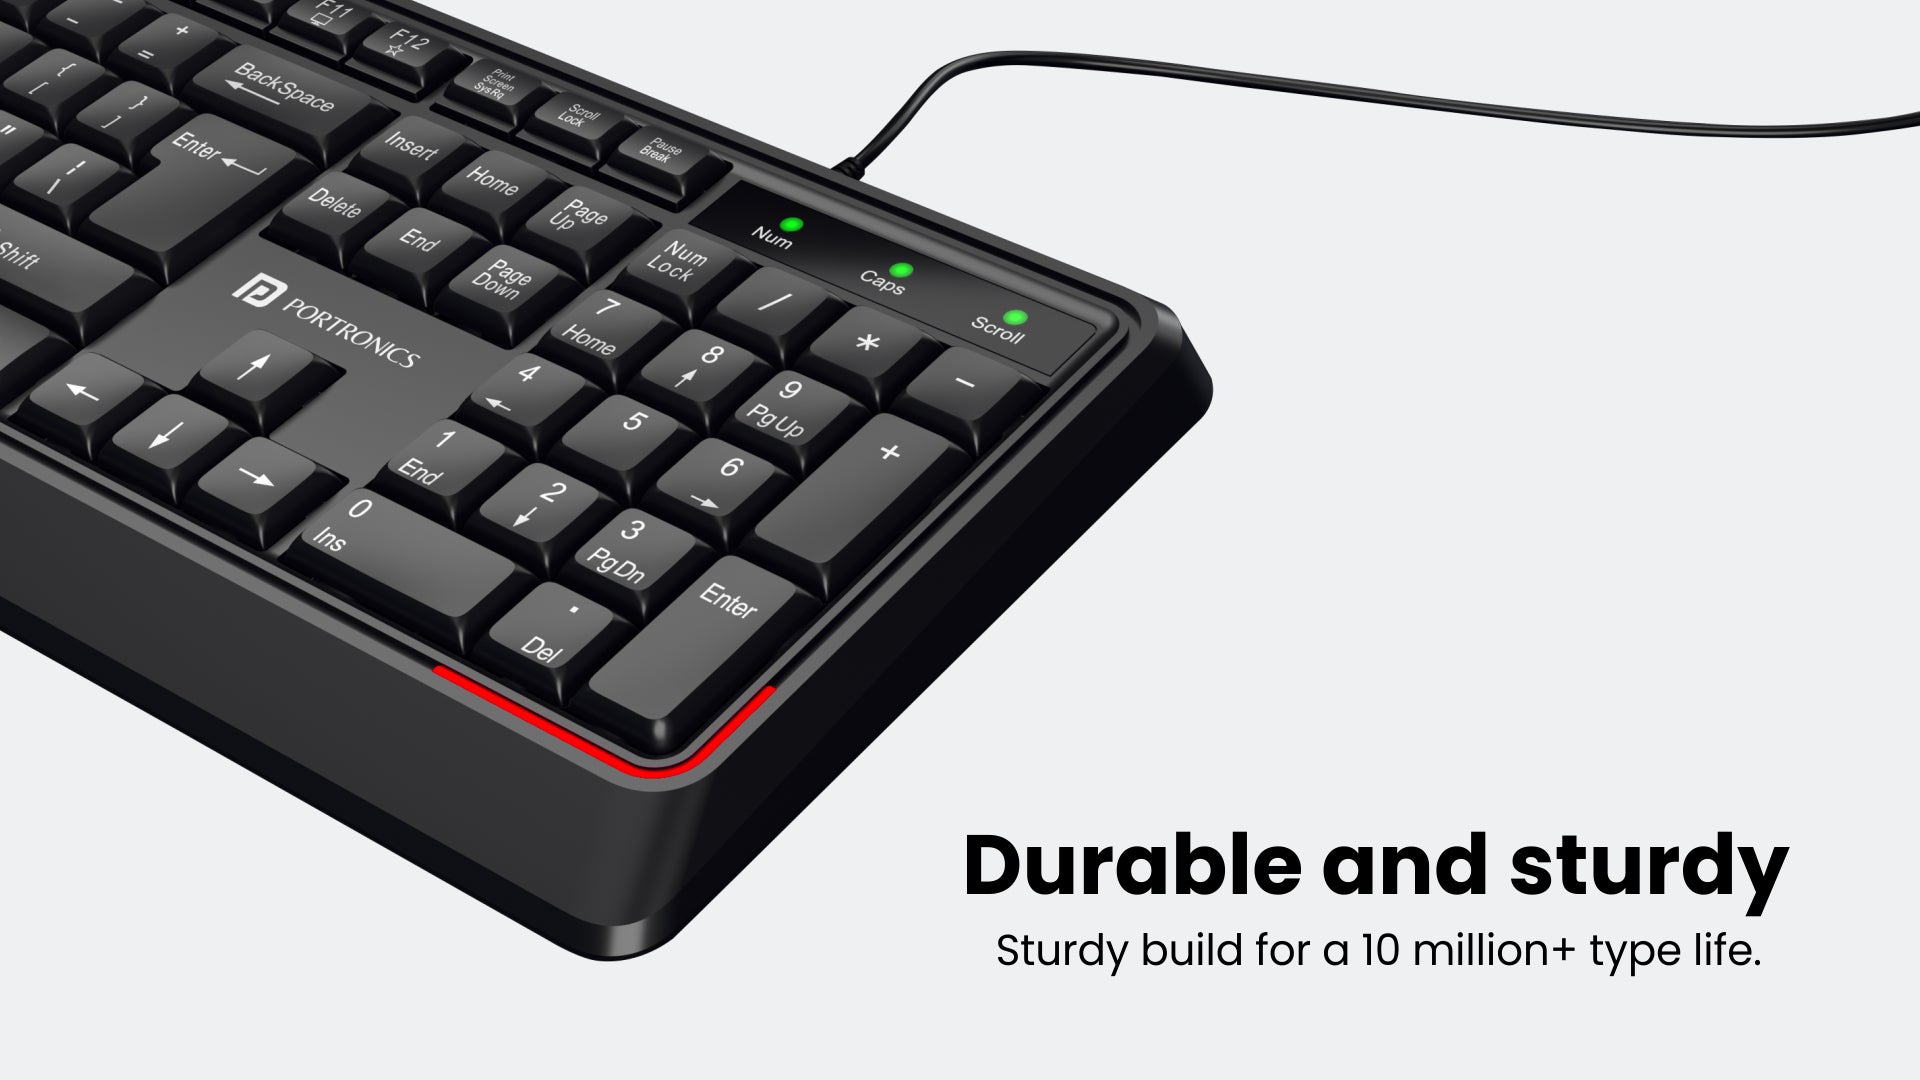 Portronics Ki-Pad wired gaming keyboard Sturdy build for a 10 million+ type life